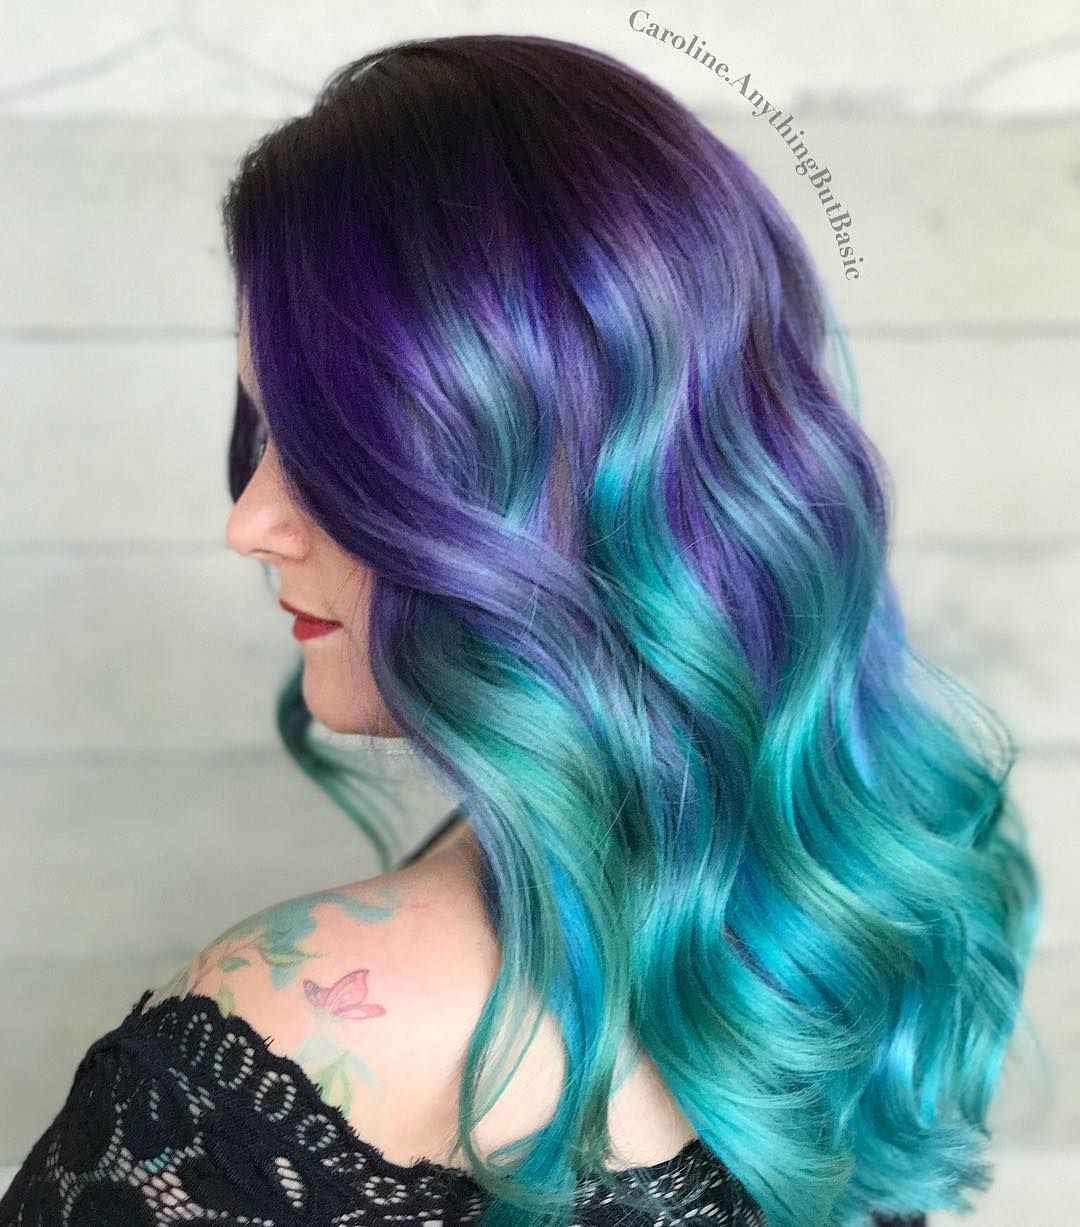 30 Sexy Green Hair Ideas To Try - Love Hairstyles